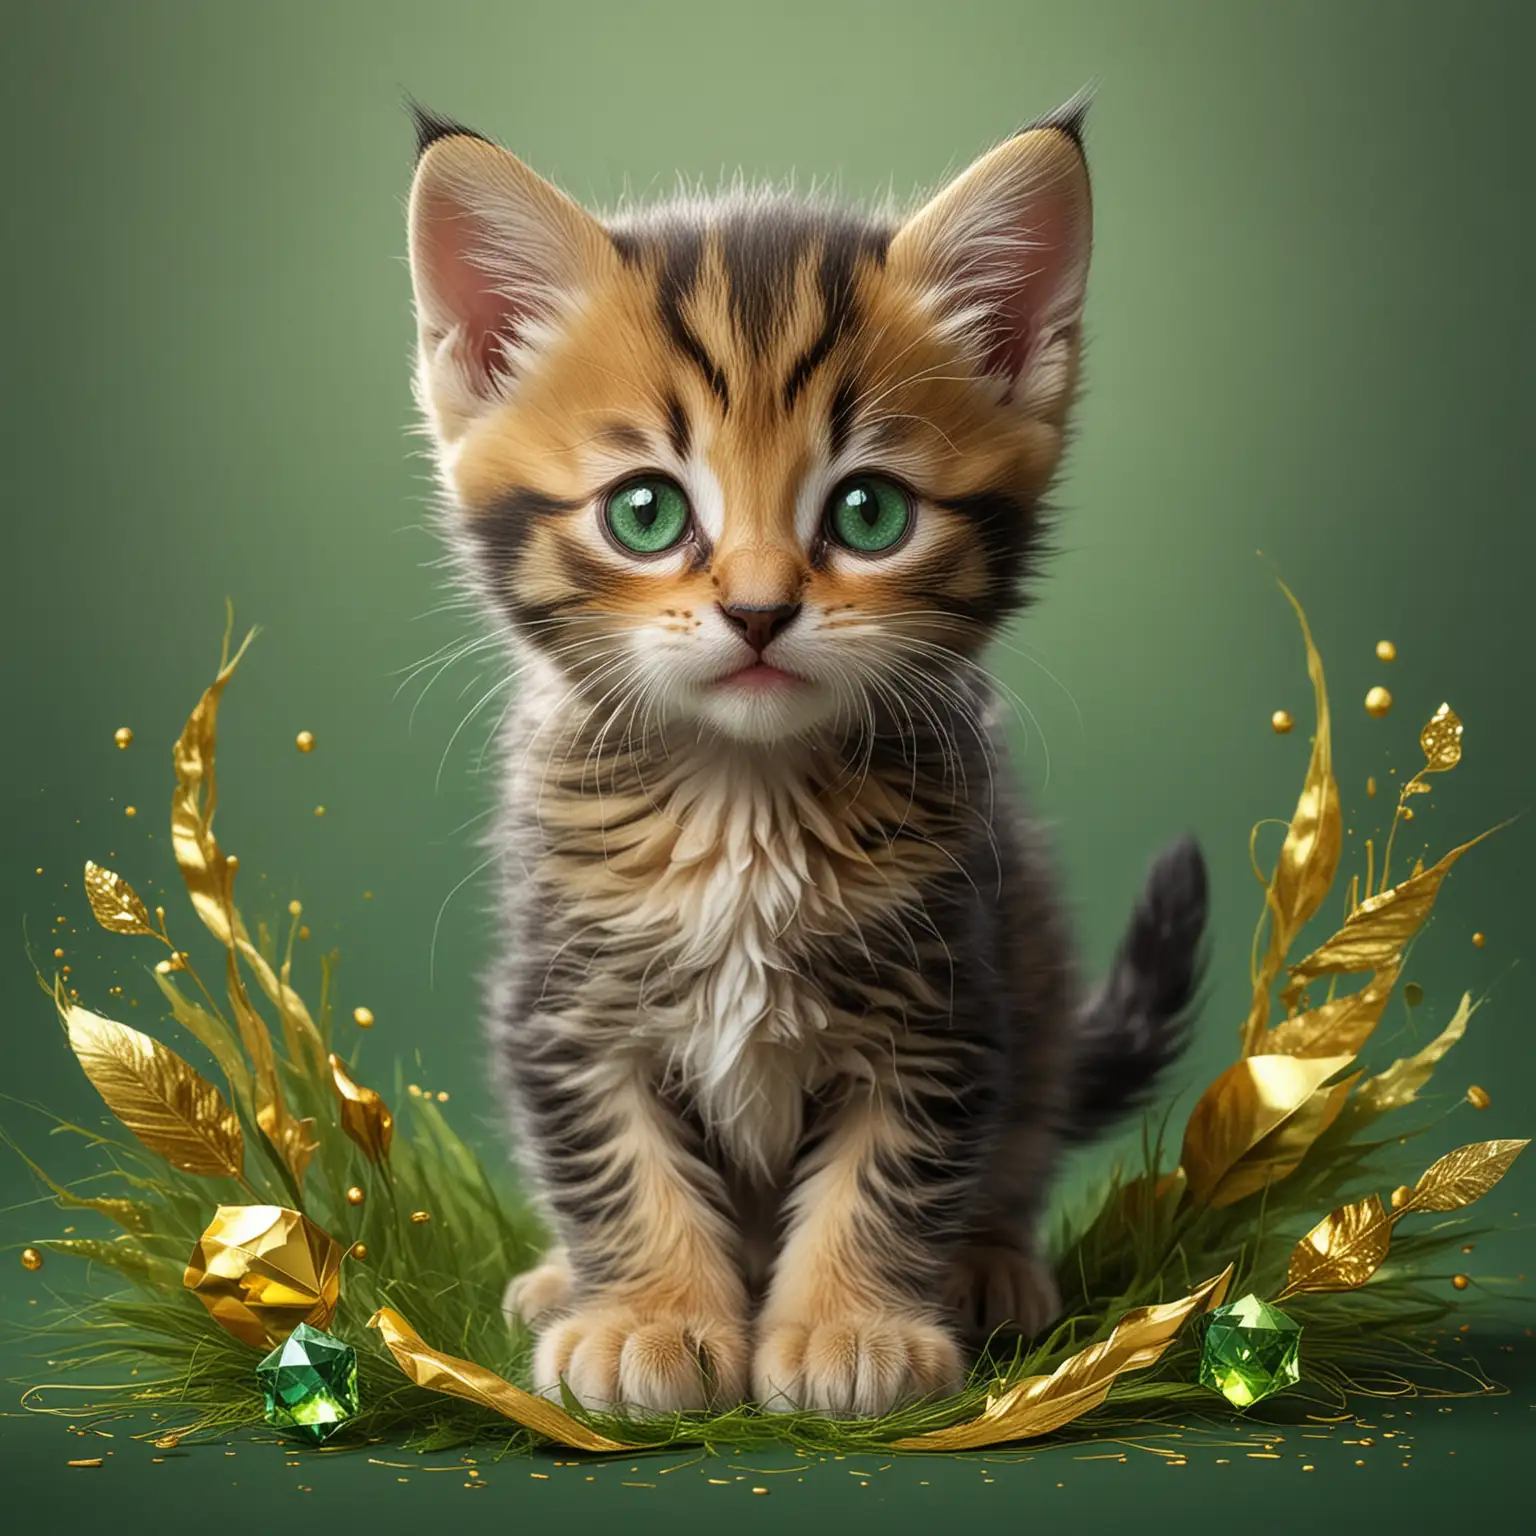 Playful Emerald Green and Gold Kitten with a Cheerful Expression